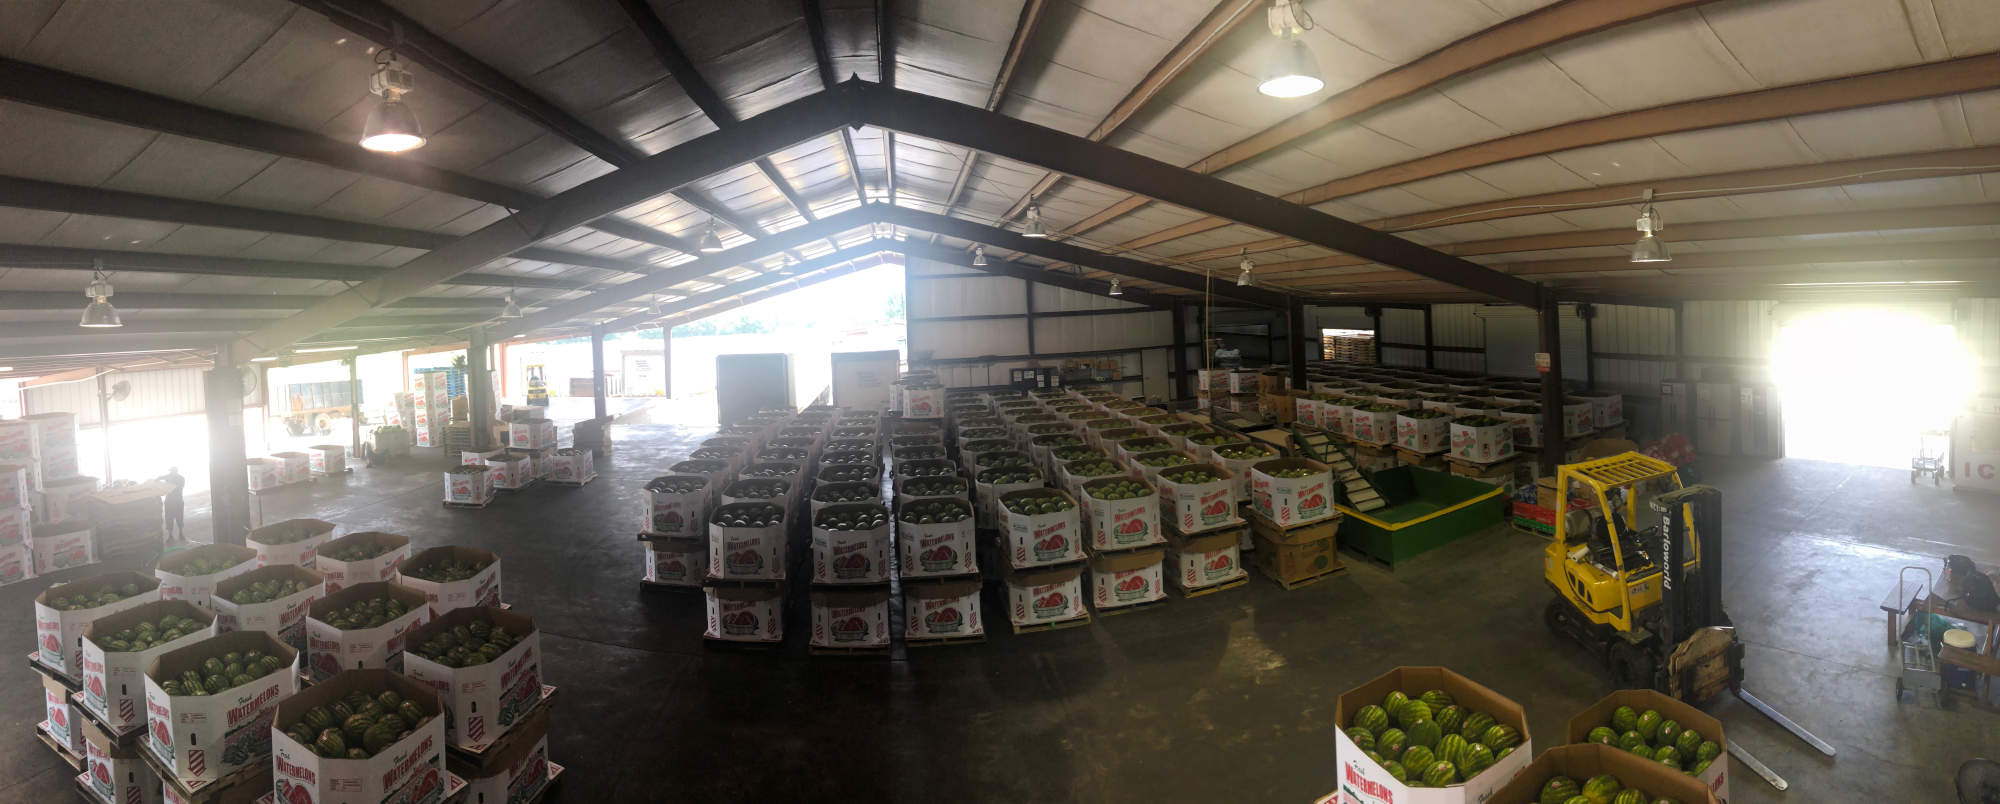 a warehouse full of watermelons for shipping